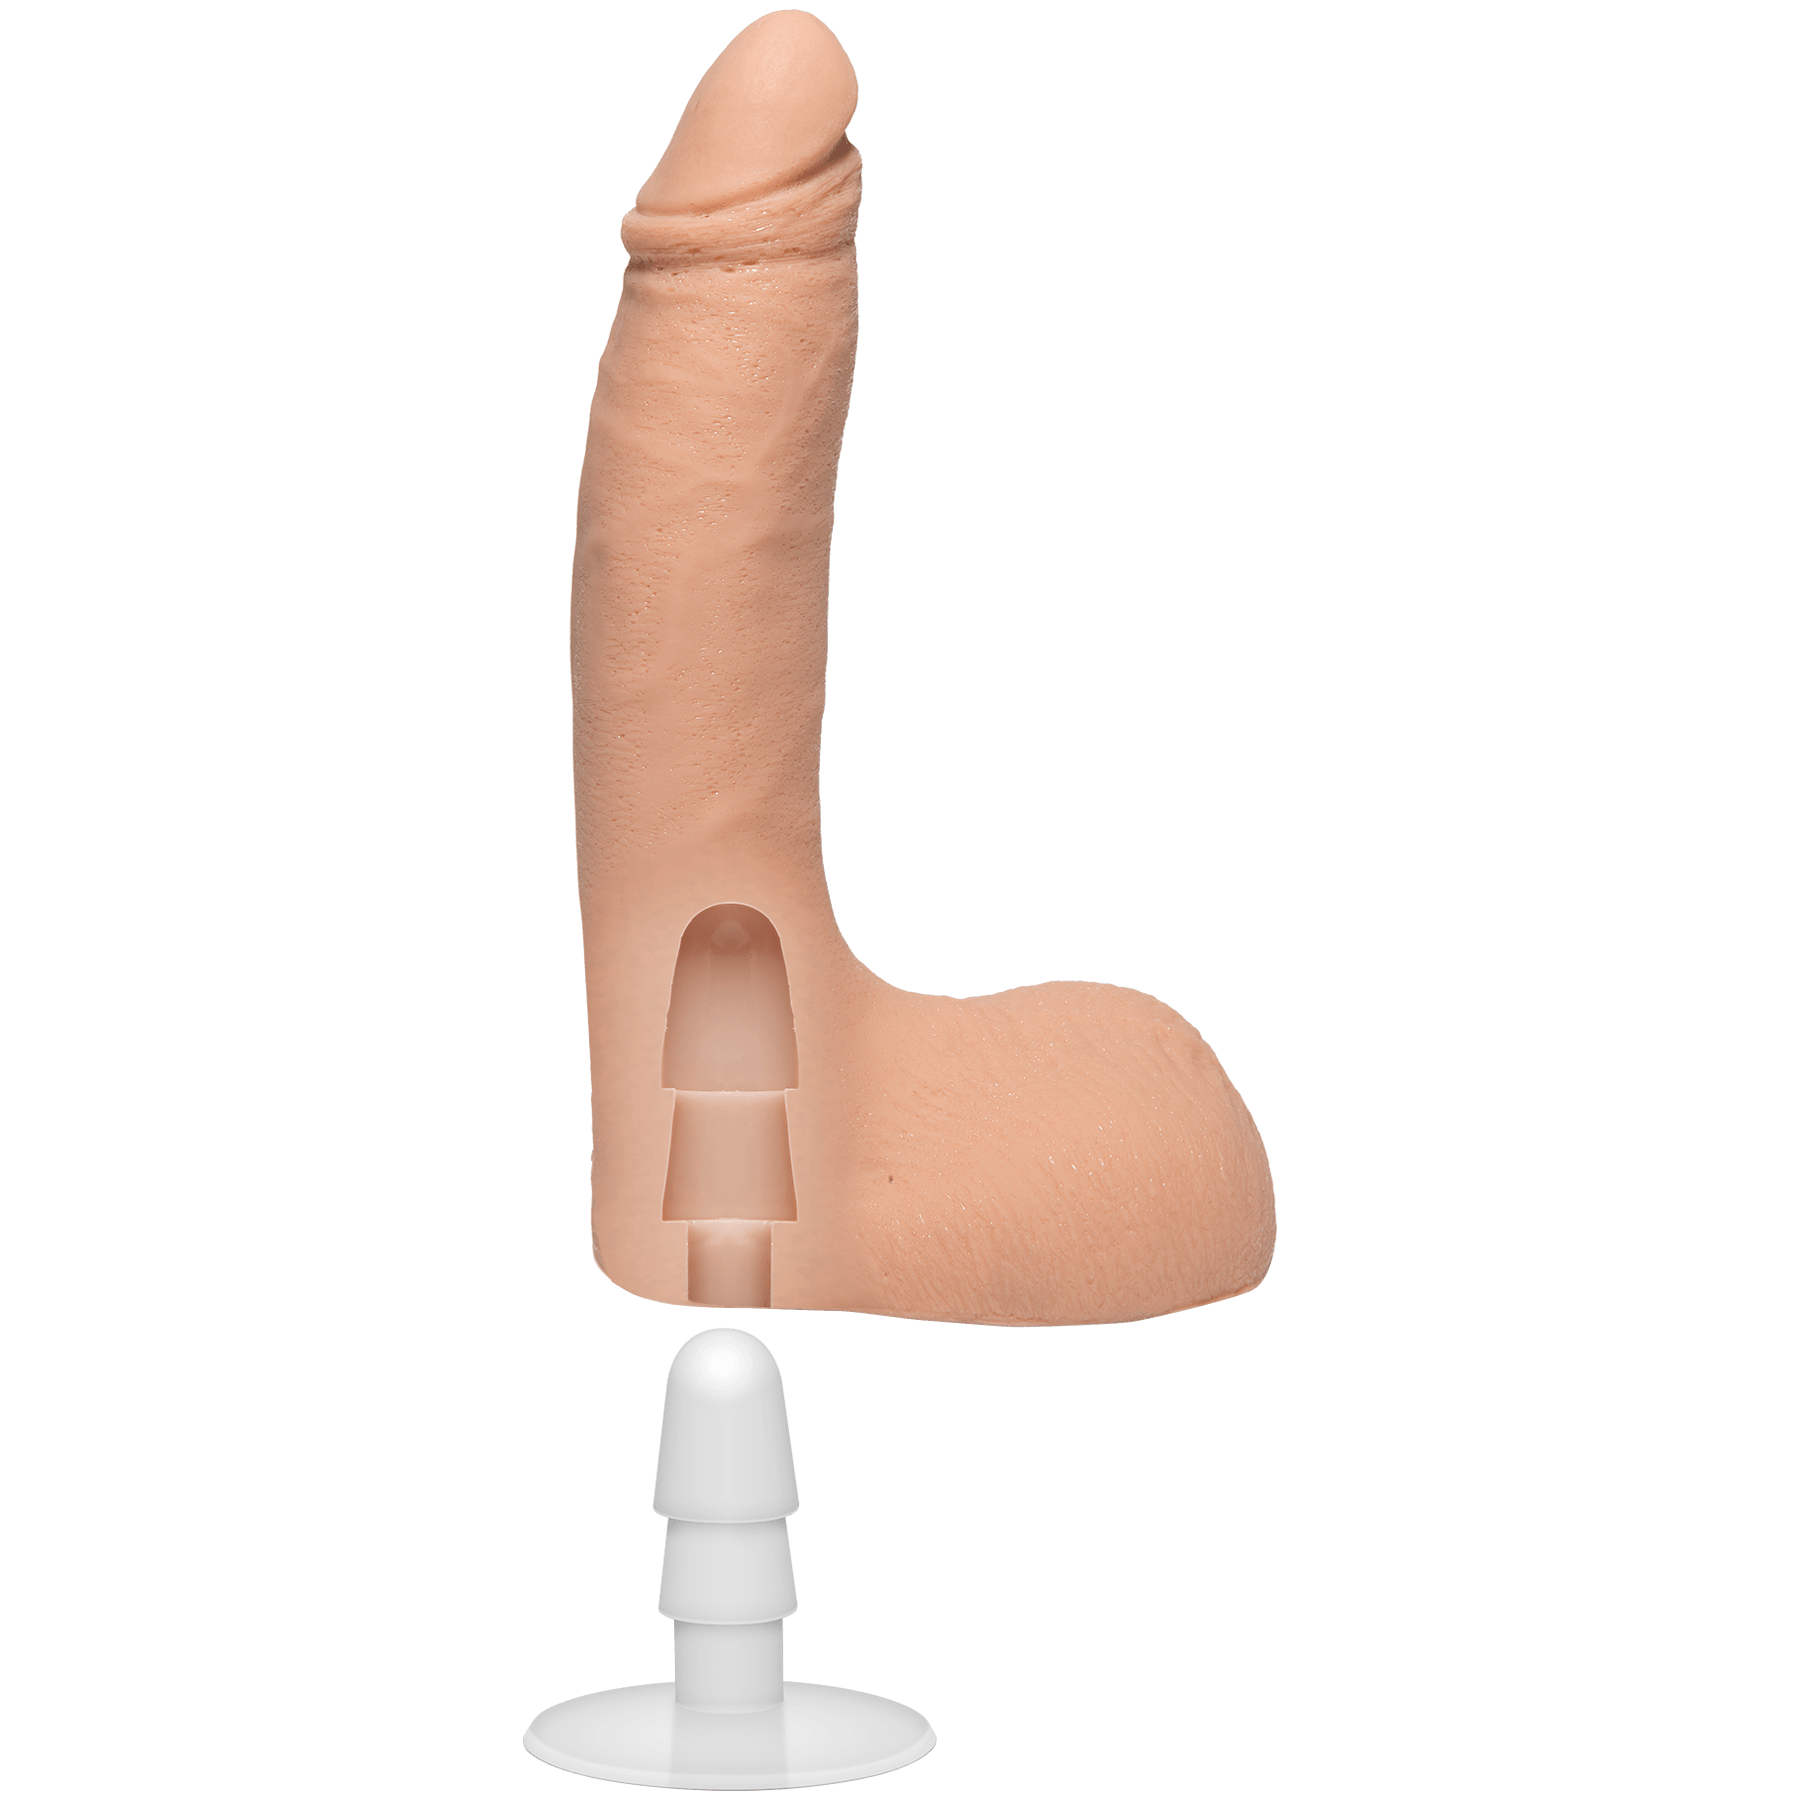 Doc Johnson Signature Cocks Randy Ultraskyn 8.5in Cock - Buy At Luxury Toy X - Free 3-Day Shipping